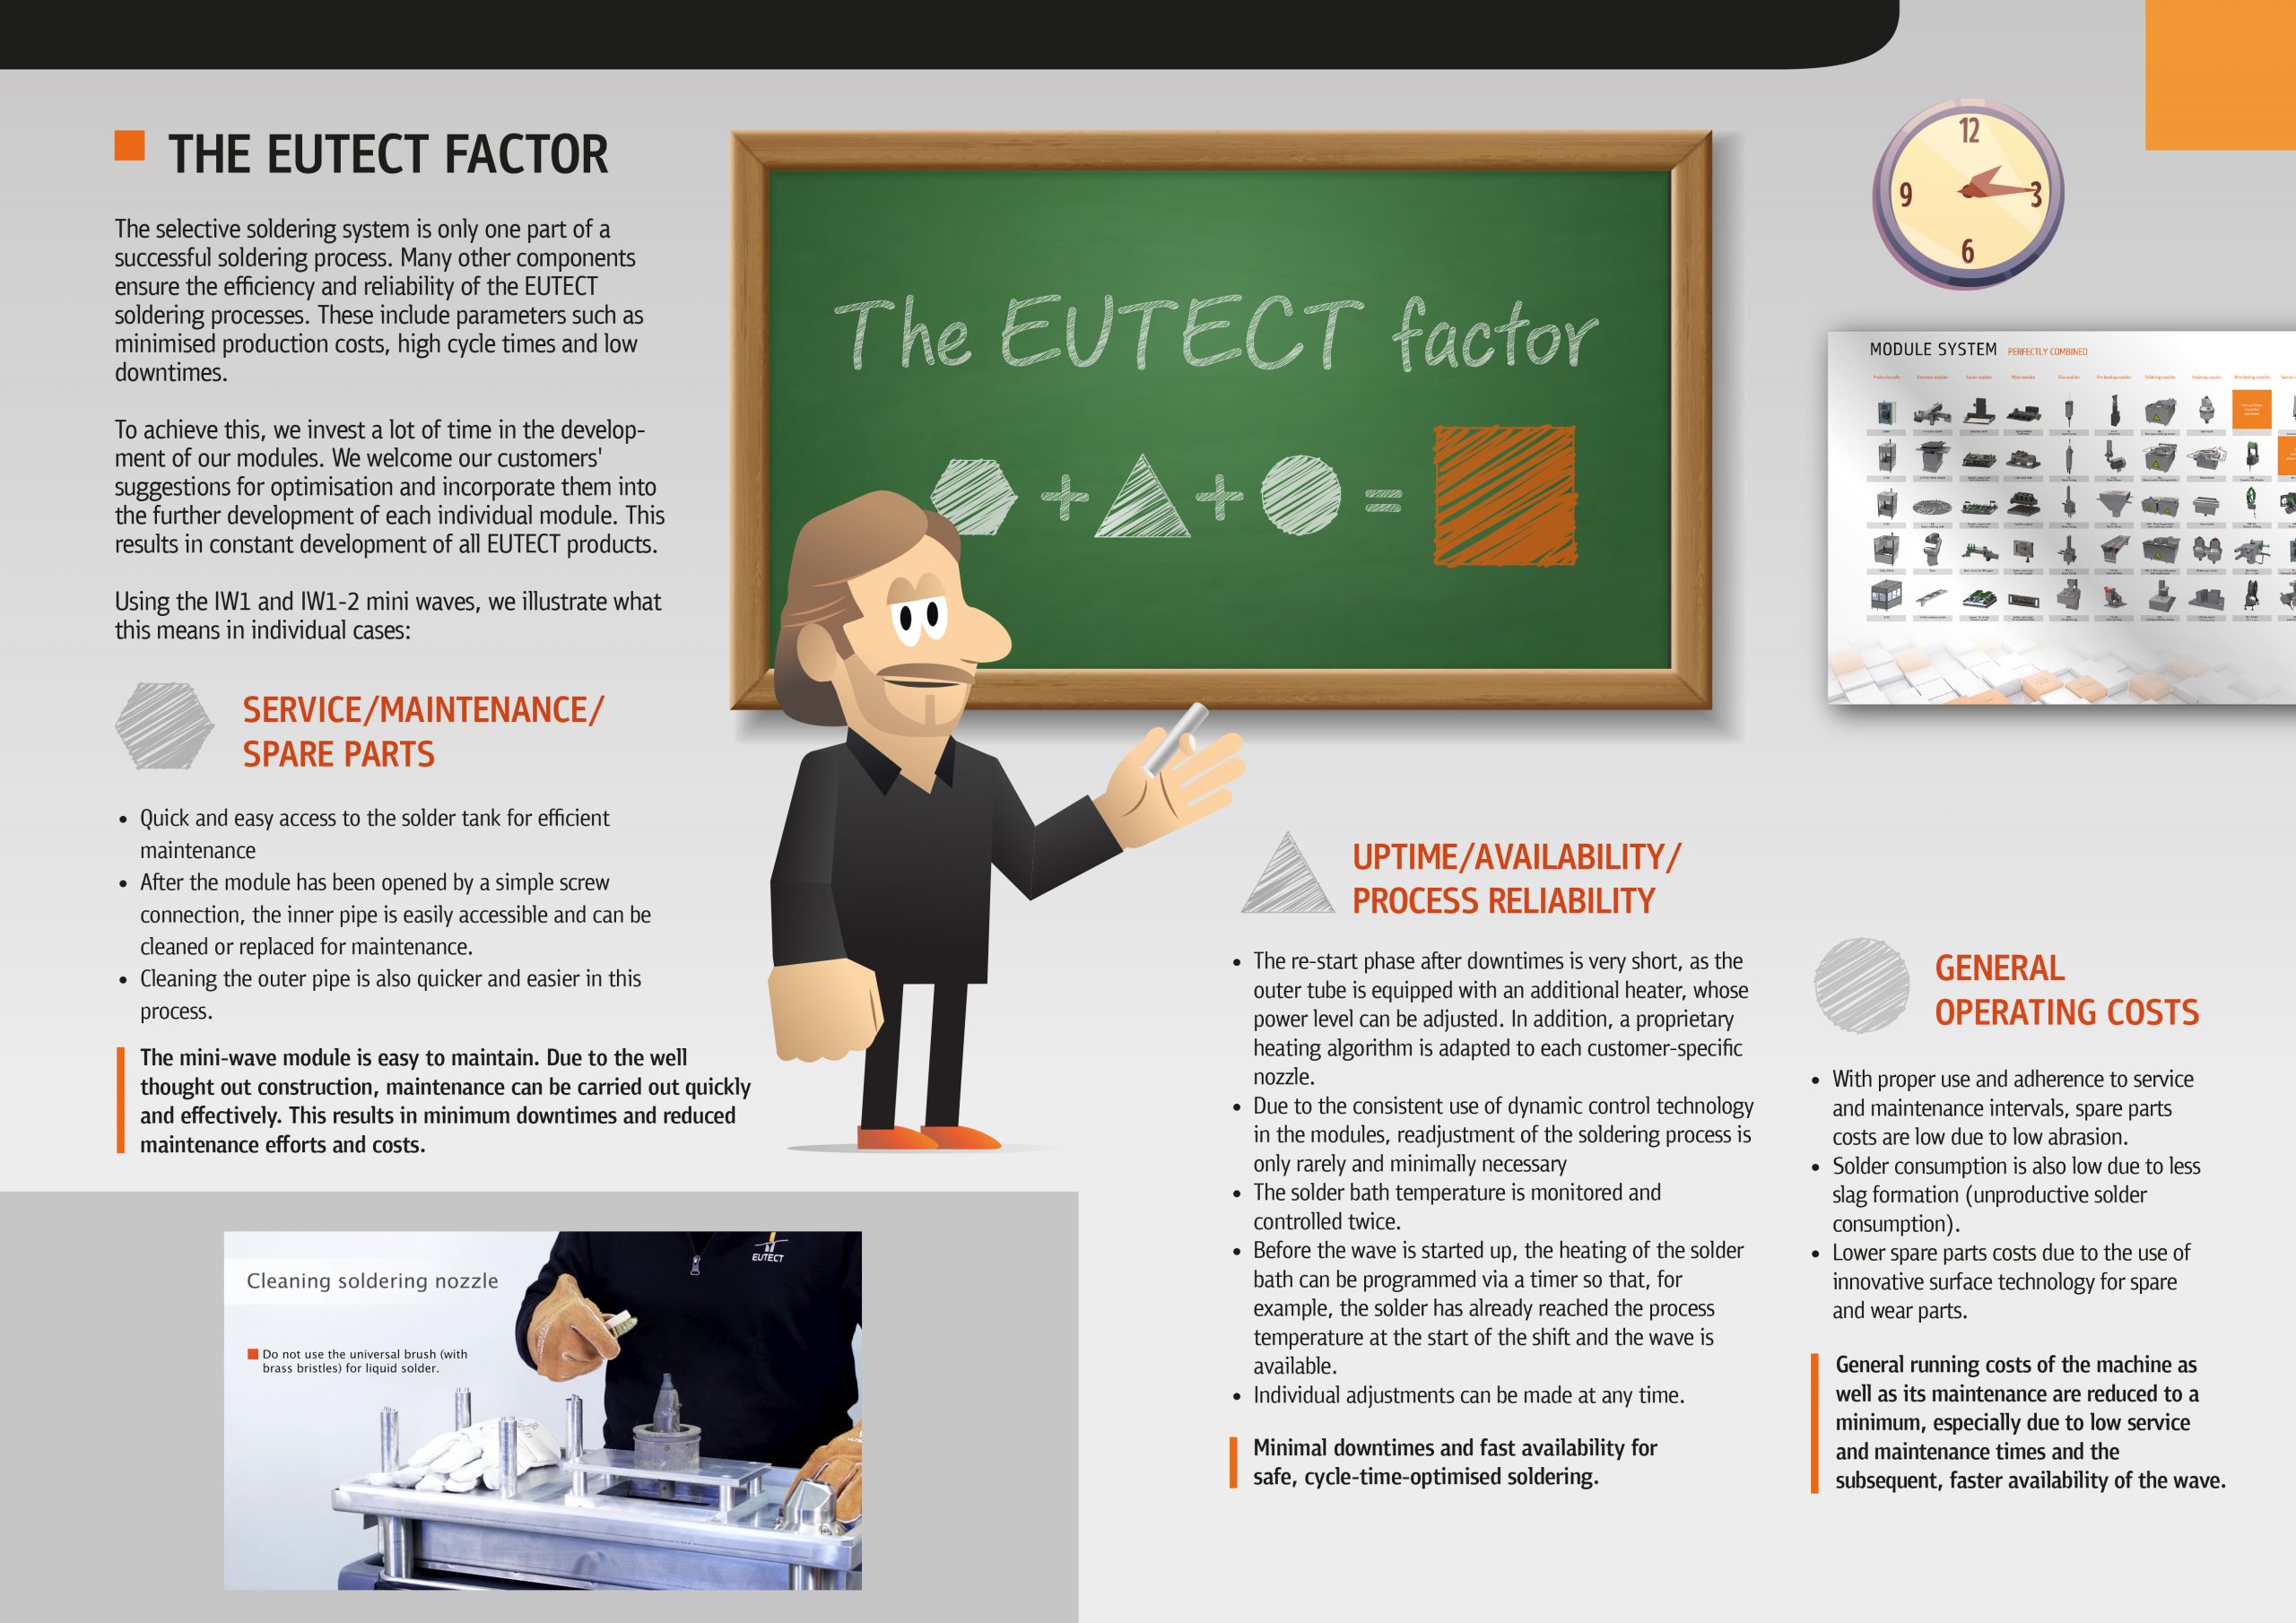 Graphical representation of the EUTECT factor